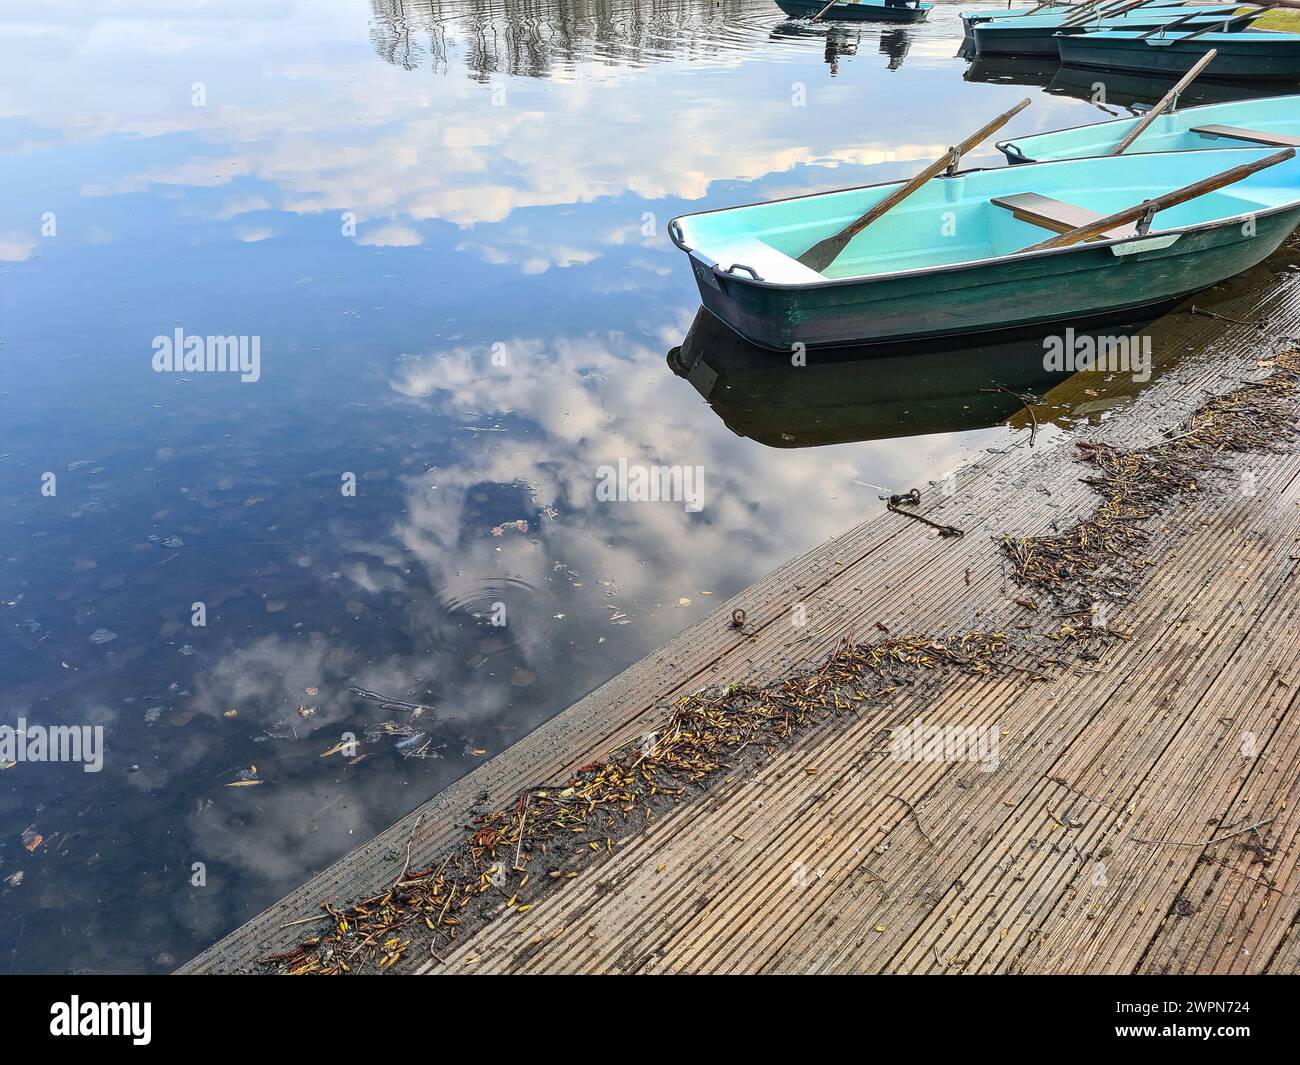 View of a rowing boat on a wooden jetty on a lake with fair weather clouds reflecting in the water, atmospheric ambience Stock Photo